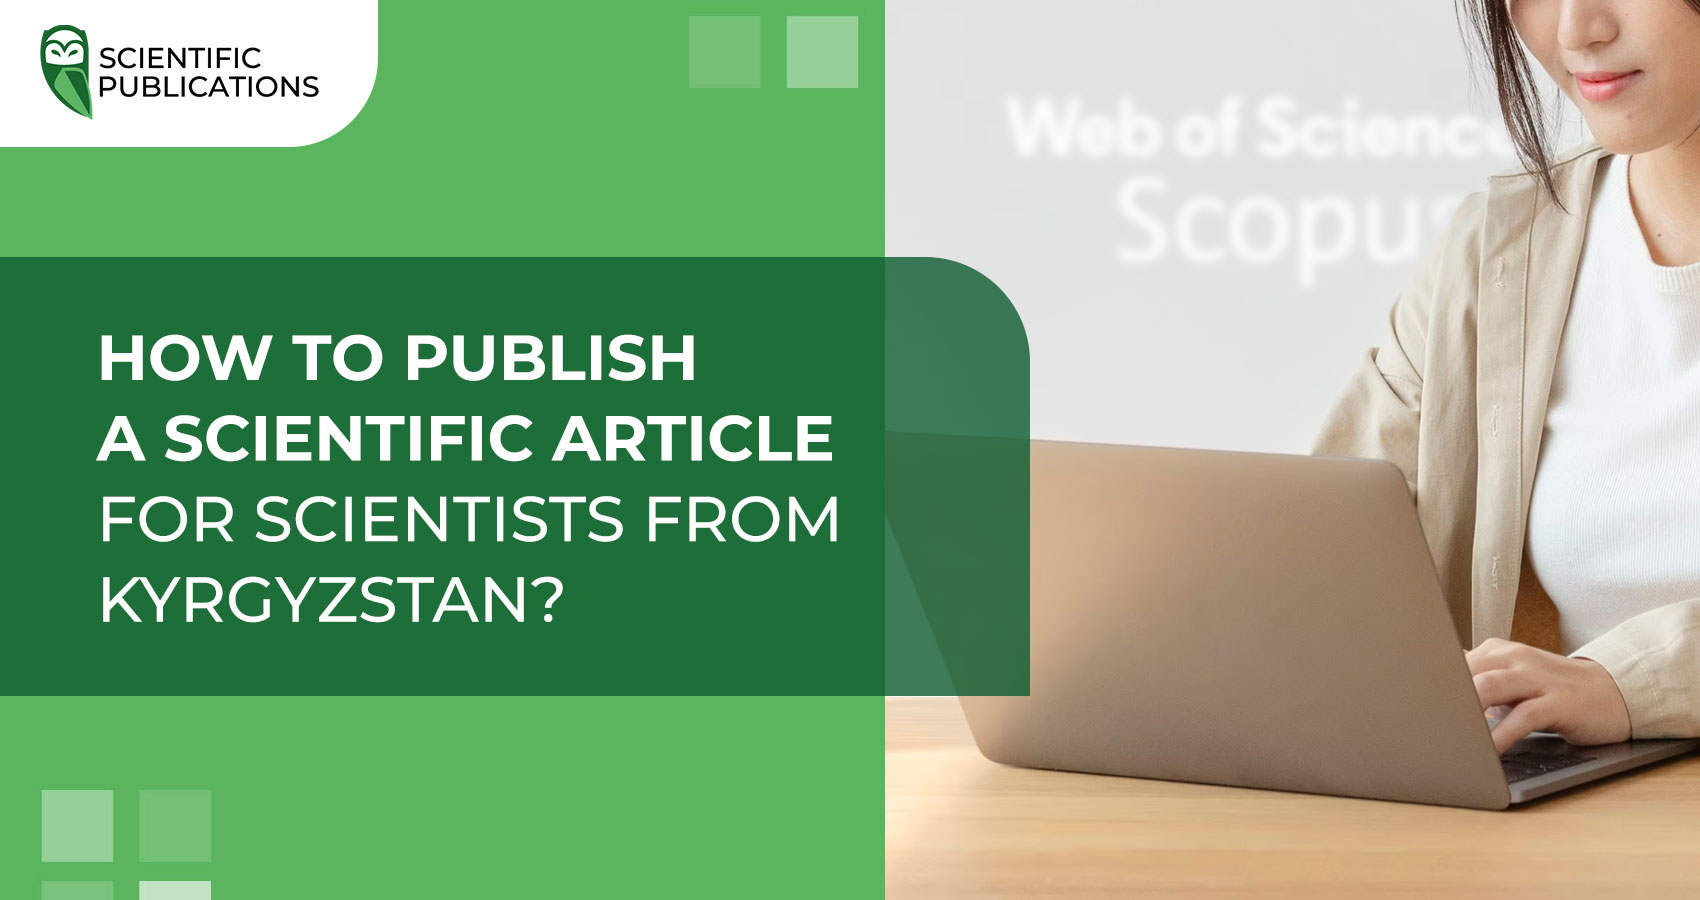 How to publish a scientific article for scientists from Kyrgyzstan?